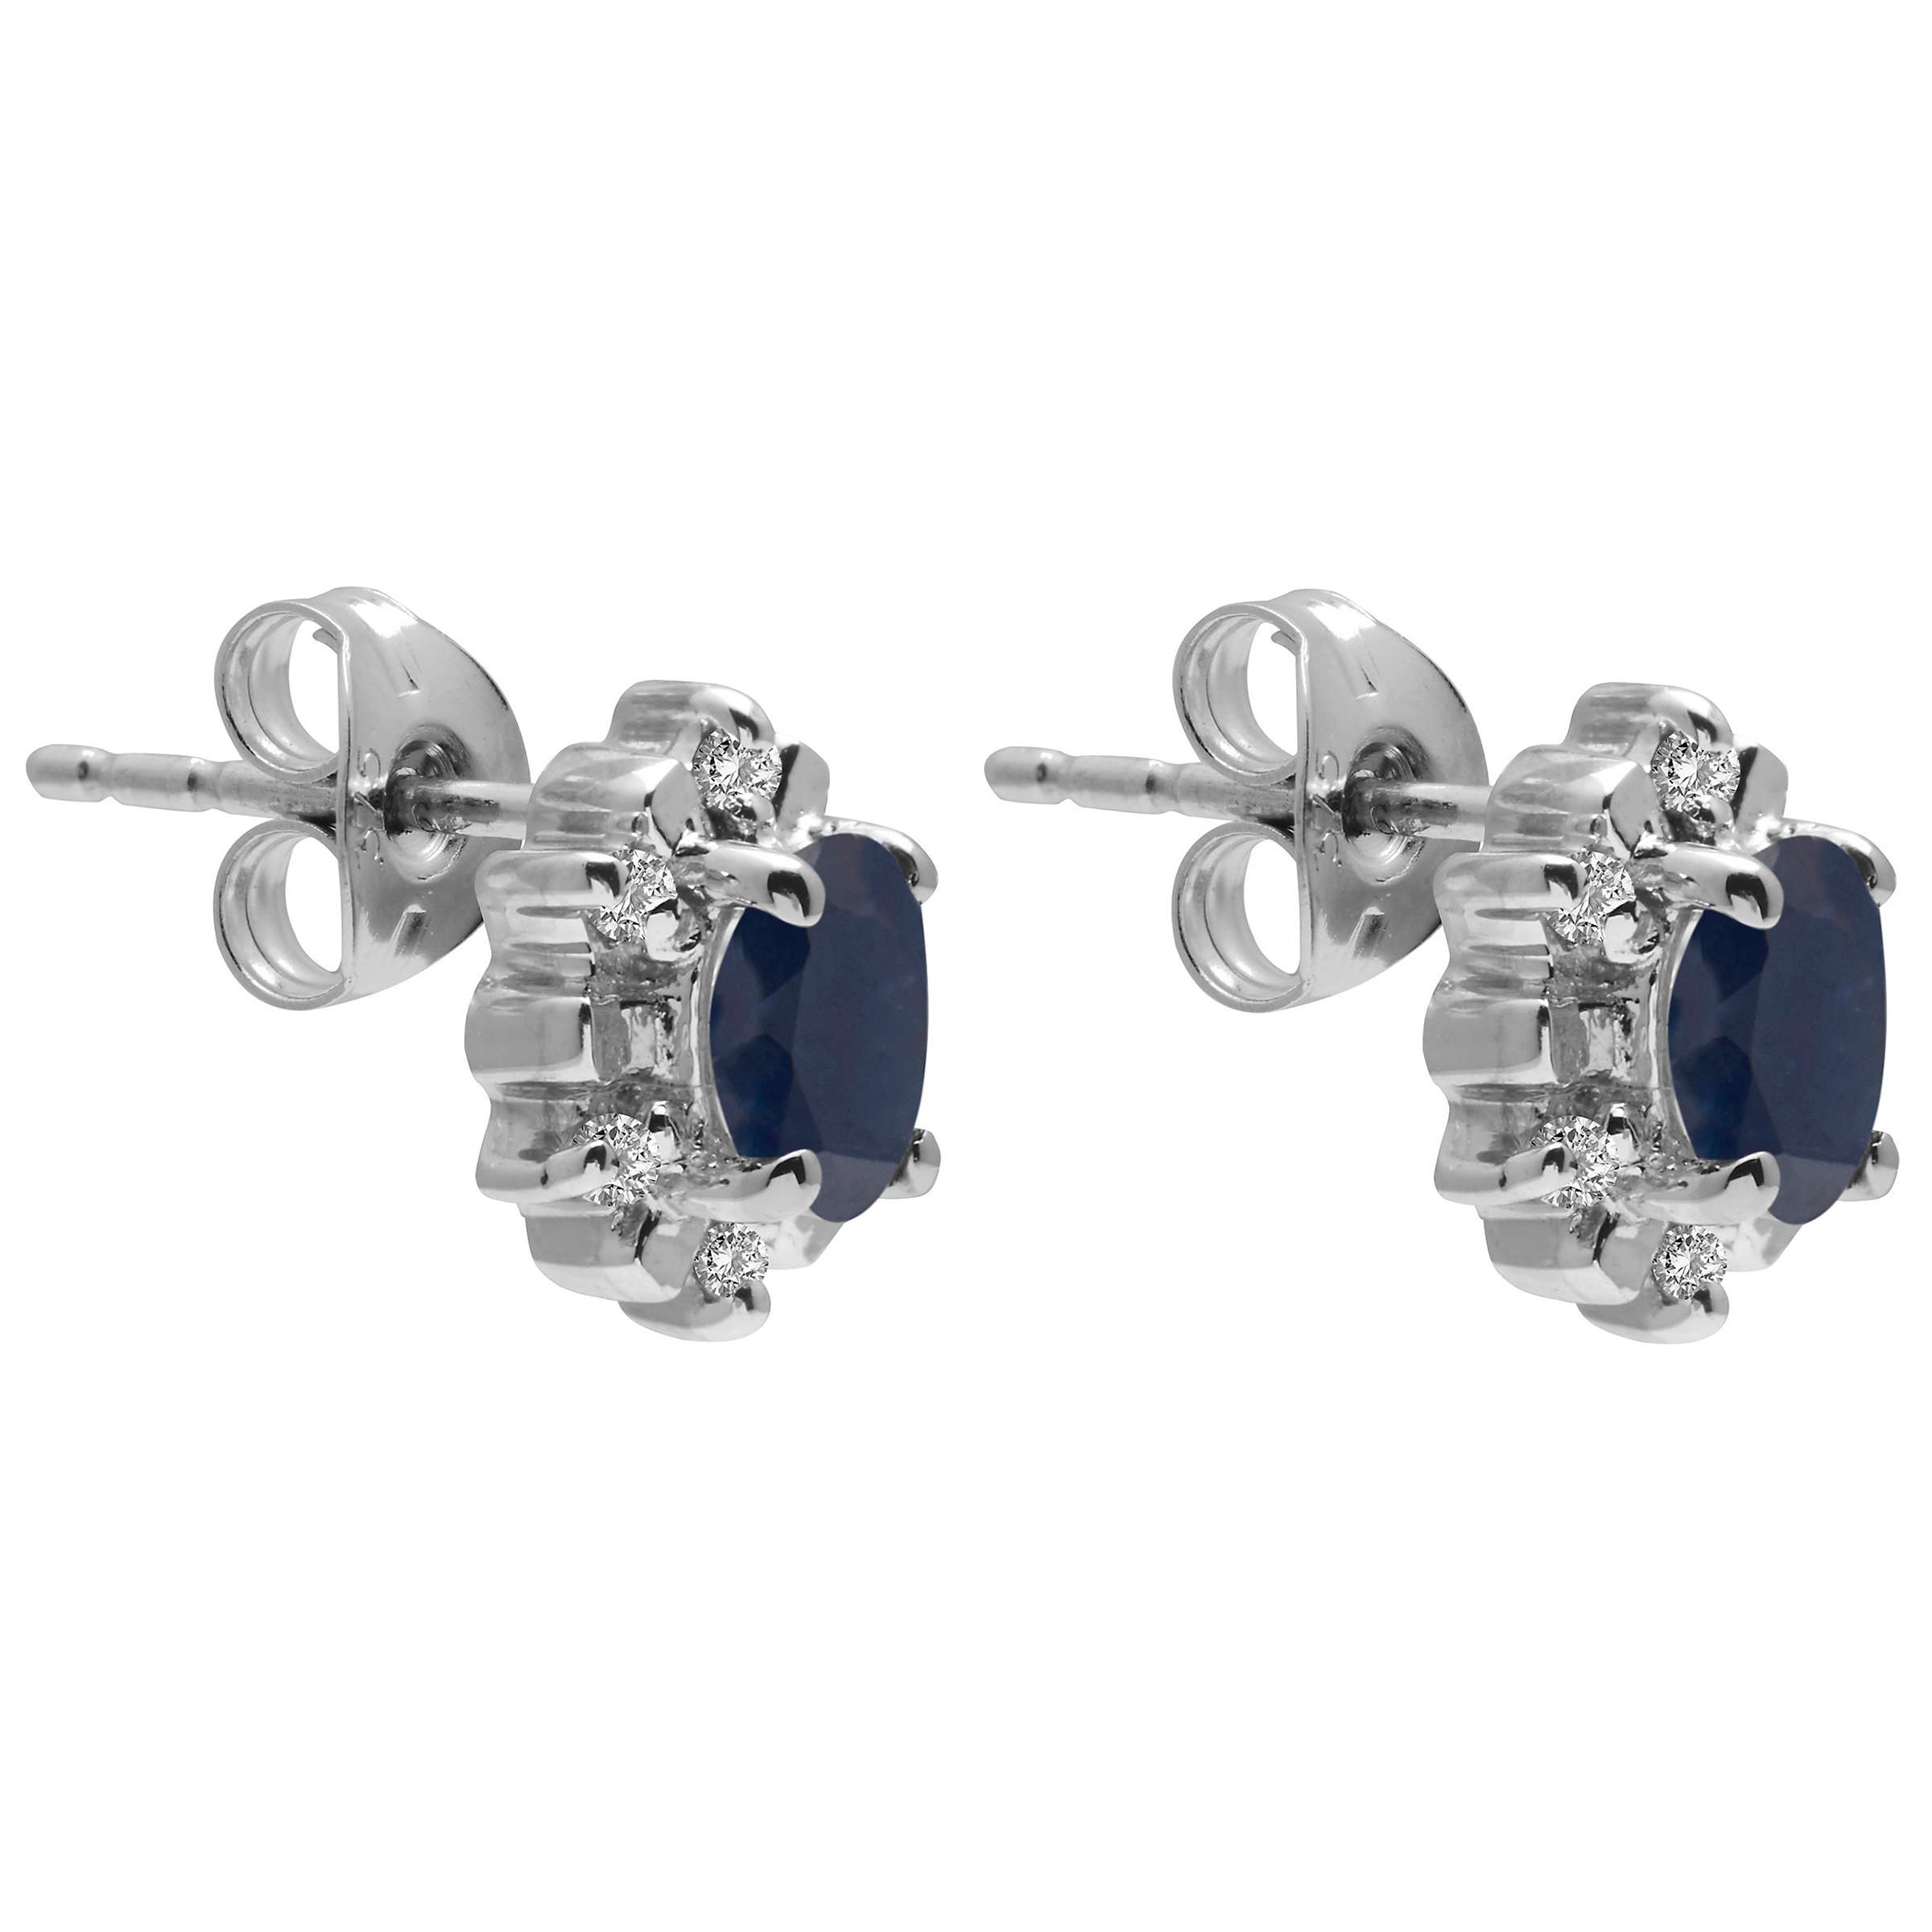 Buy A B Davis 9ct Gold Oval Precious Stone and Diamond Stud Earrings Online at johnlewis.com